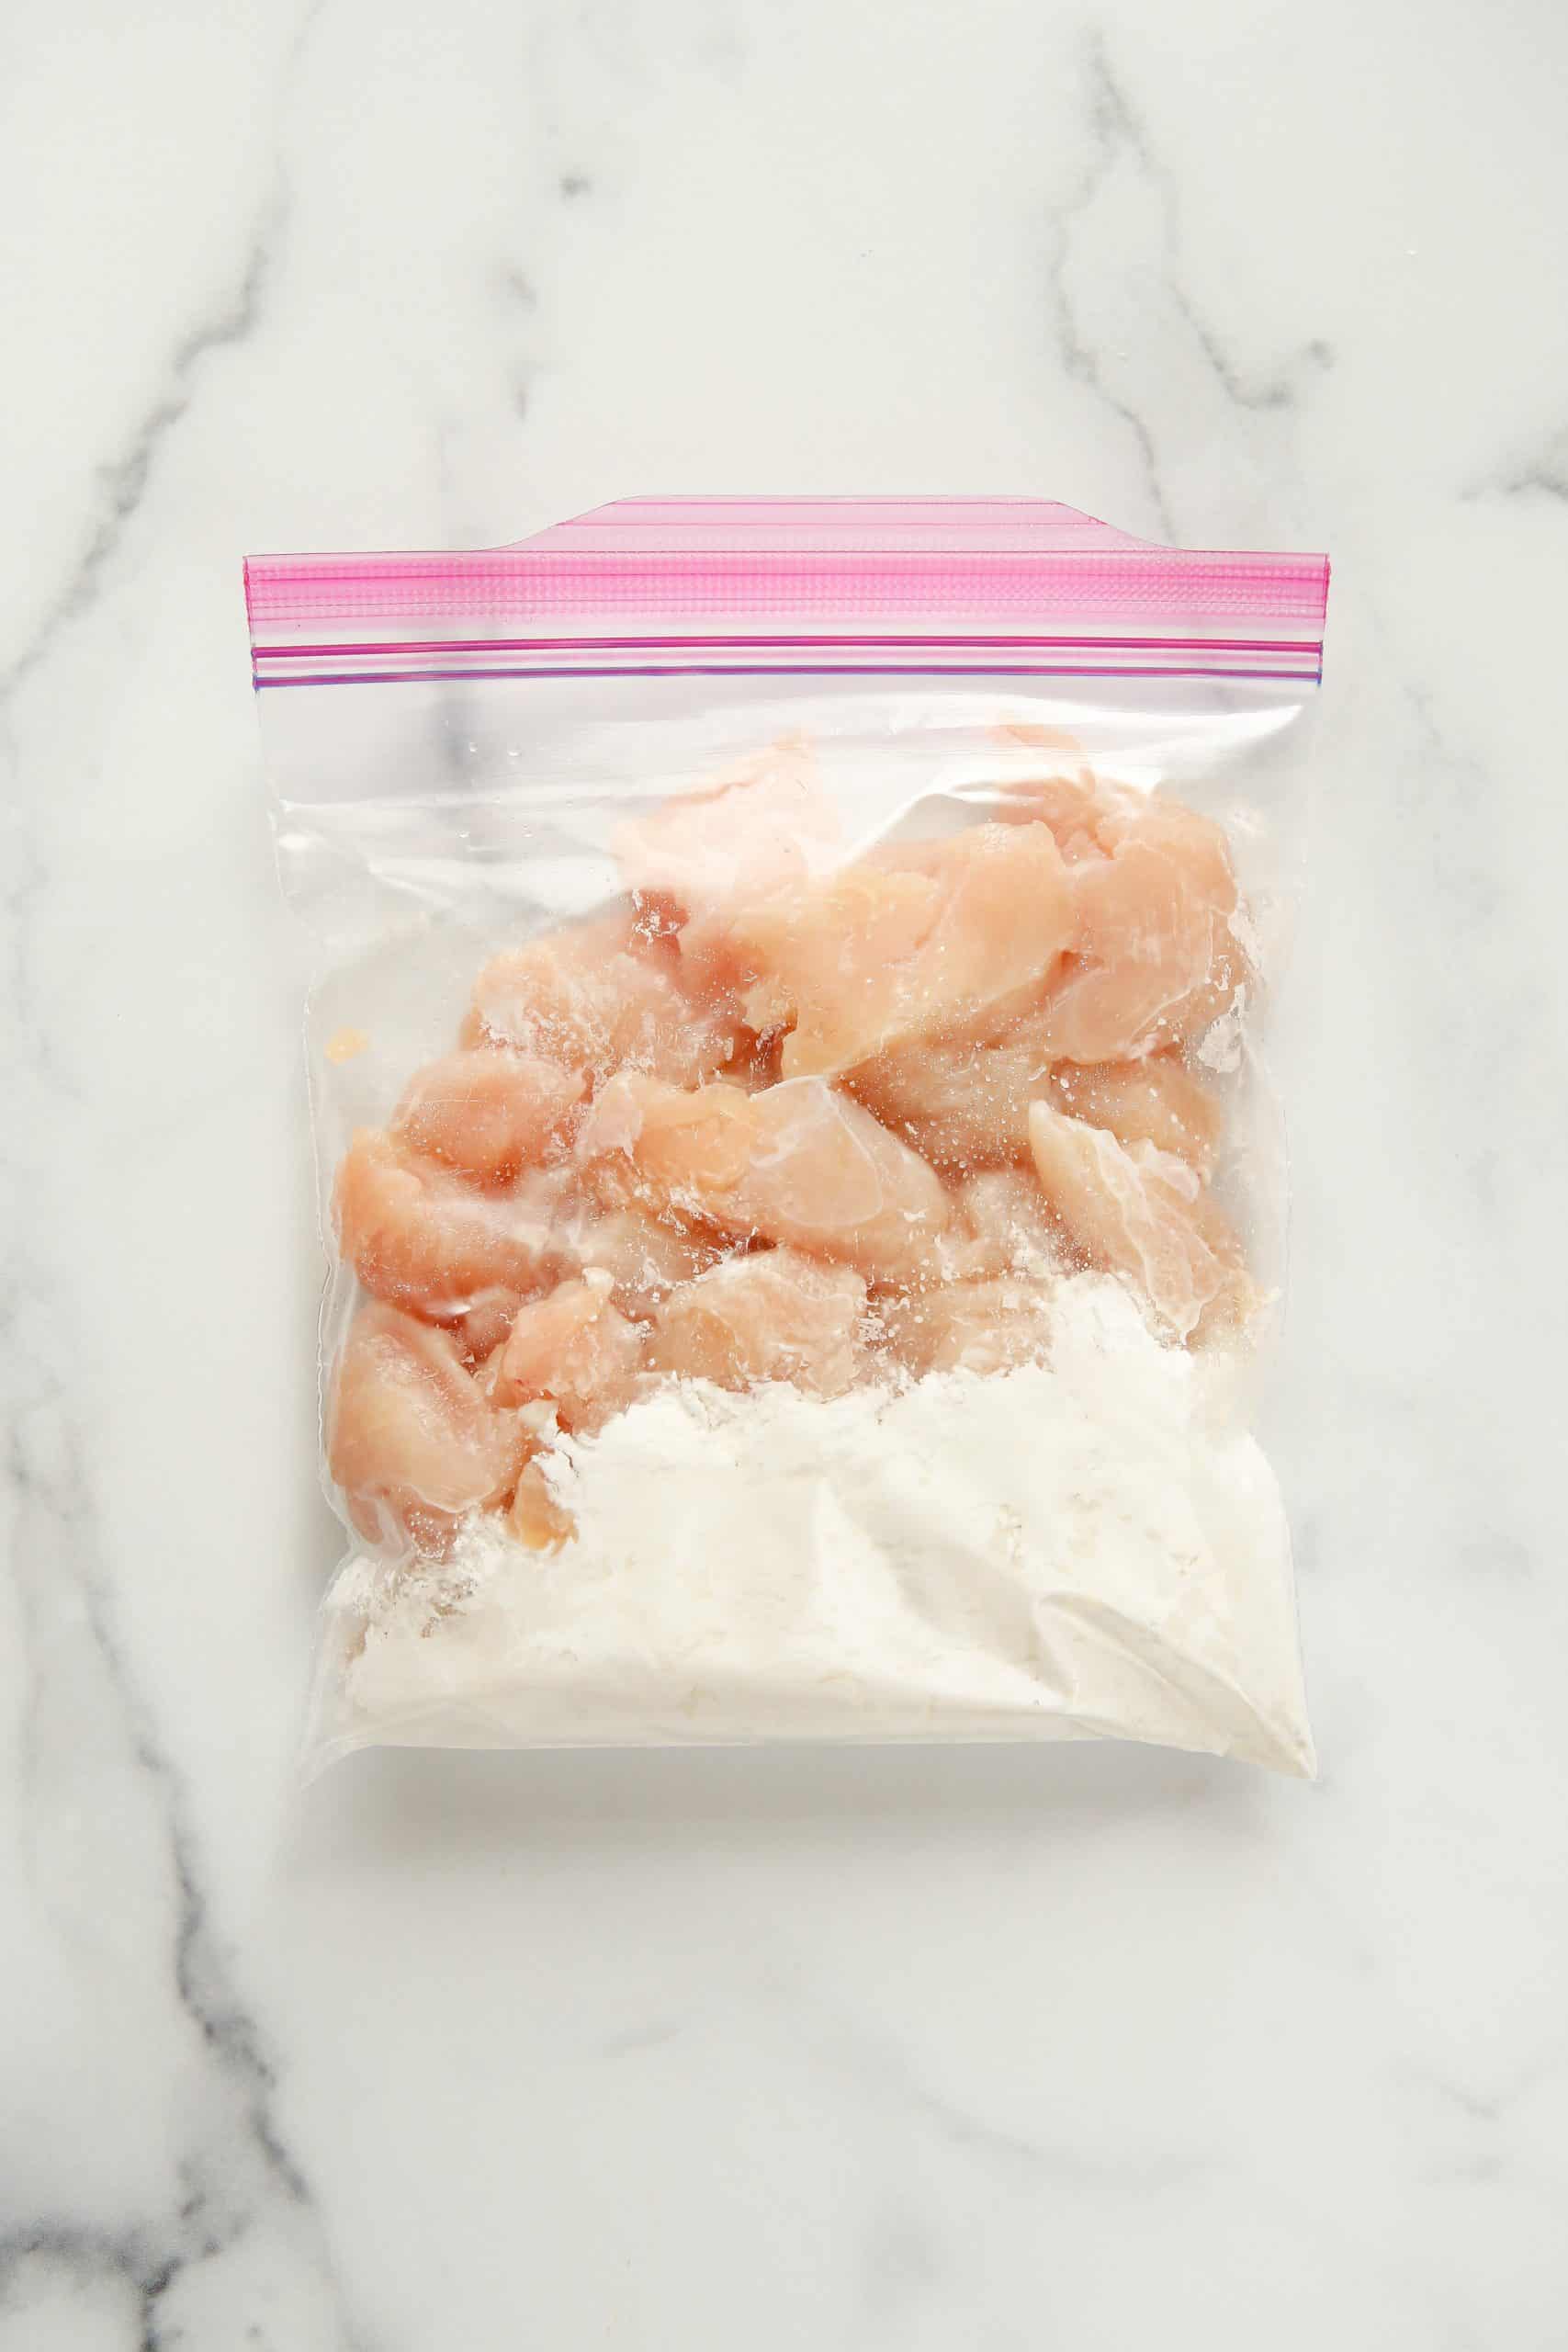 diced chicken breast in a ziploc bag filled with cornstarch.